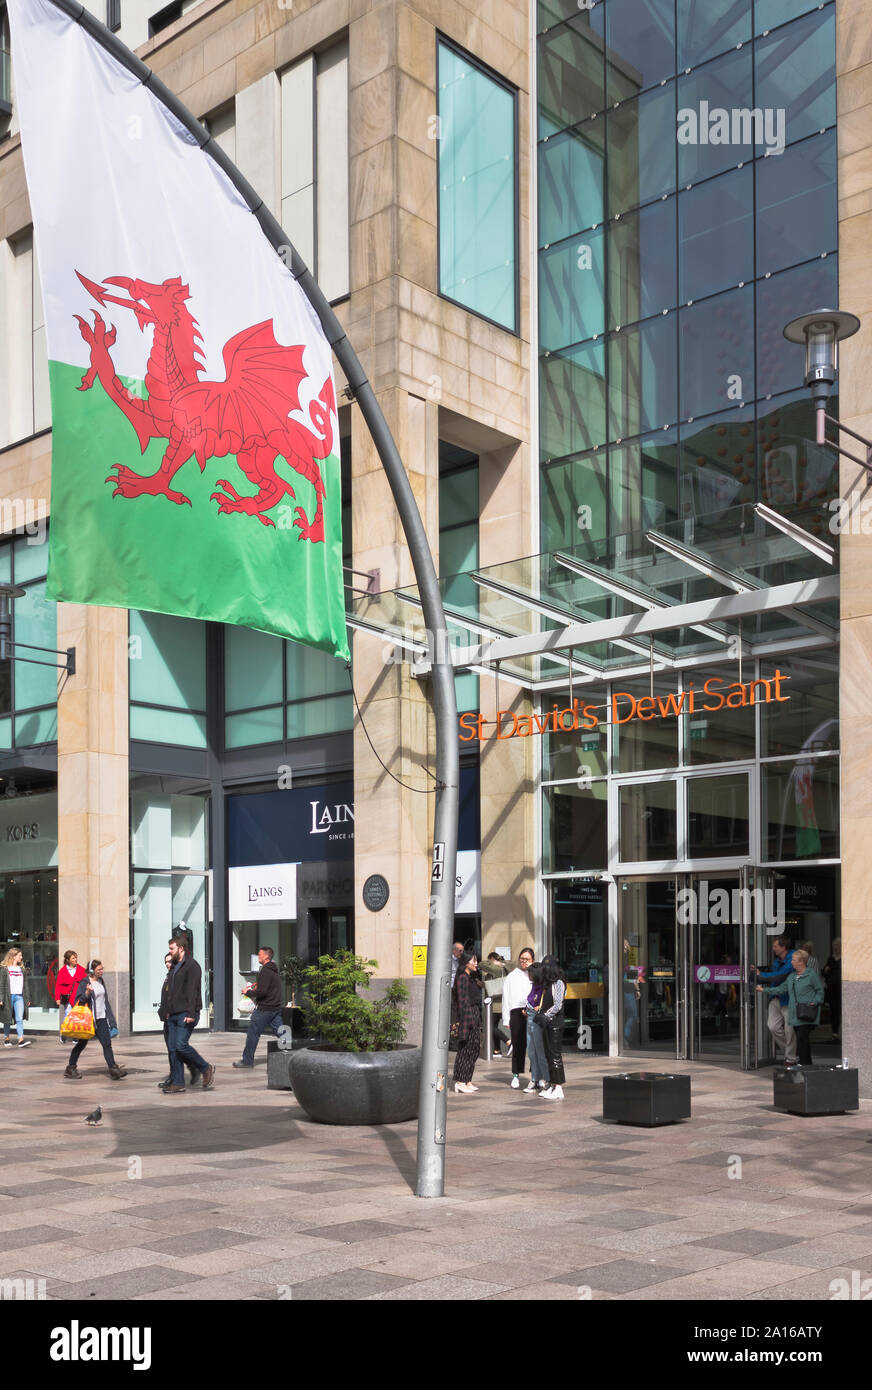 dh St Davids shopping centre CARDIFF WALES People street entrance to shopping city saint david mall Stock Photo